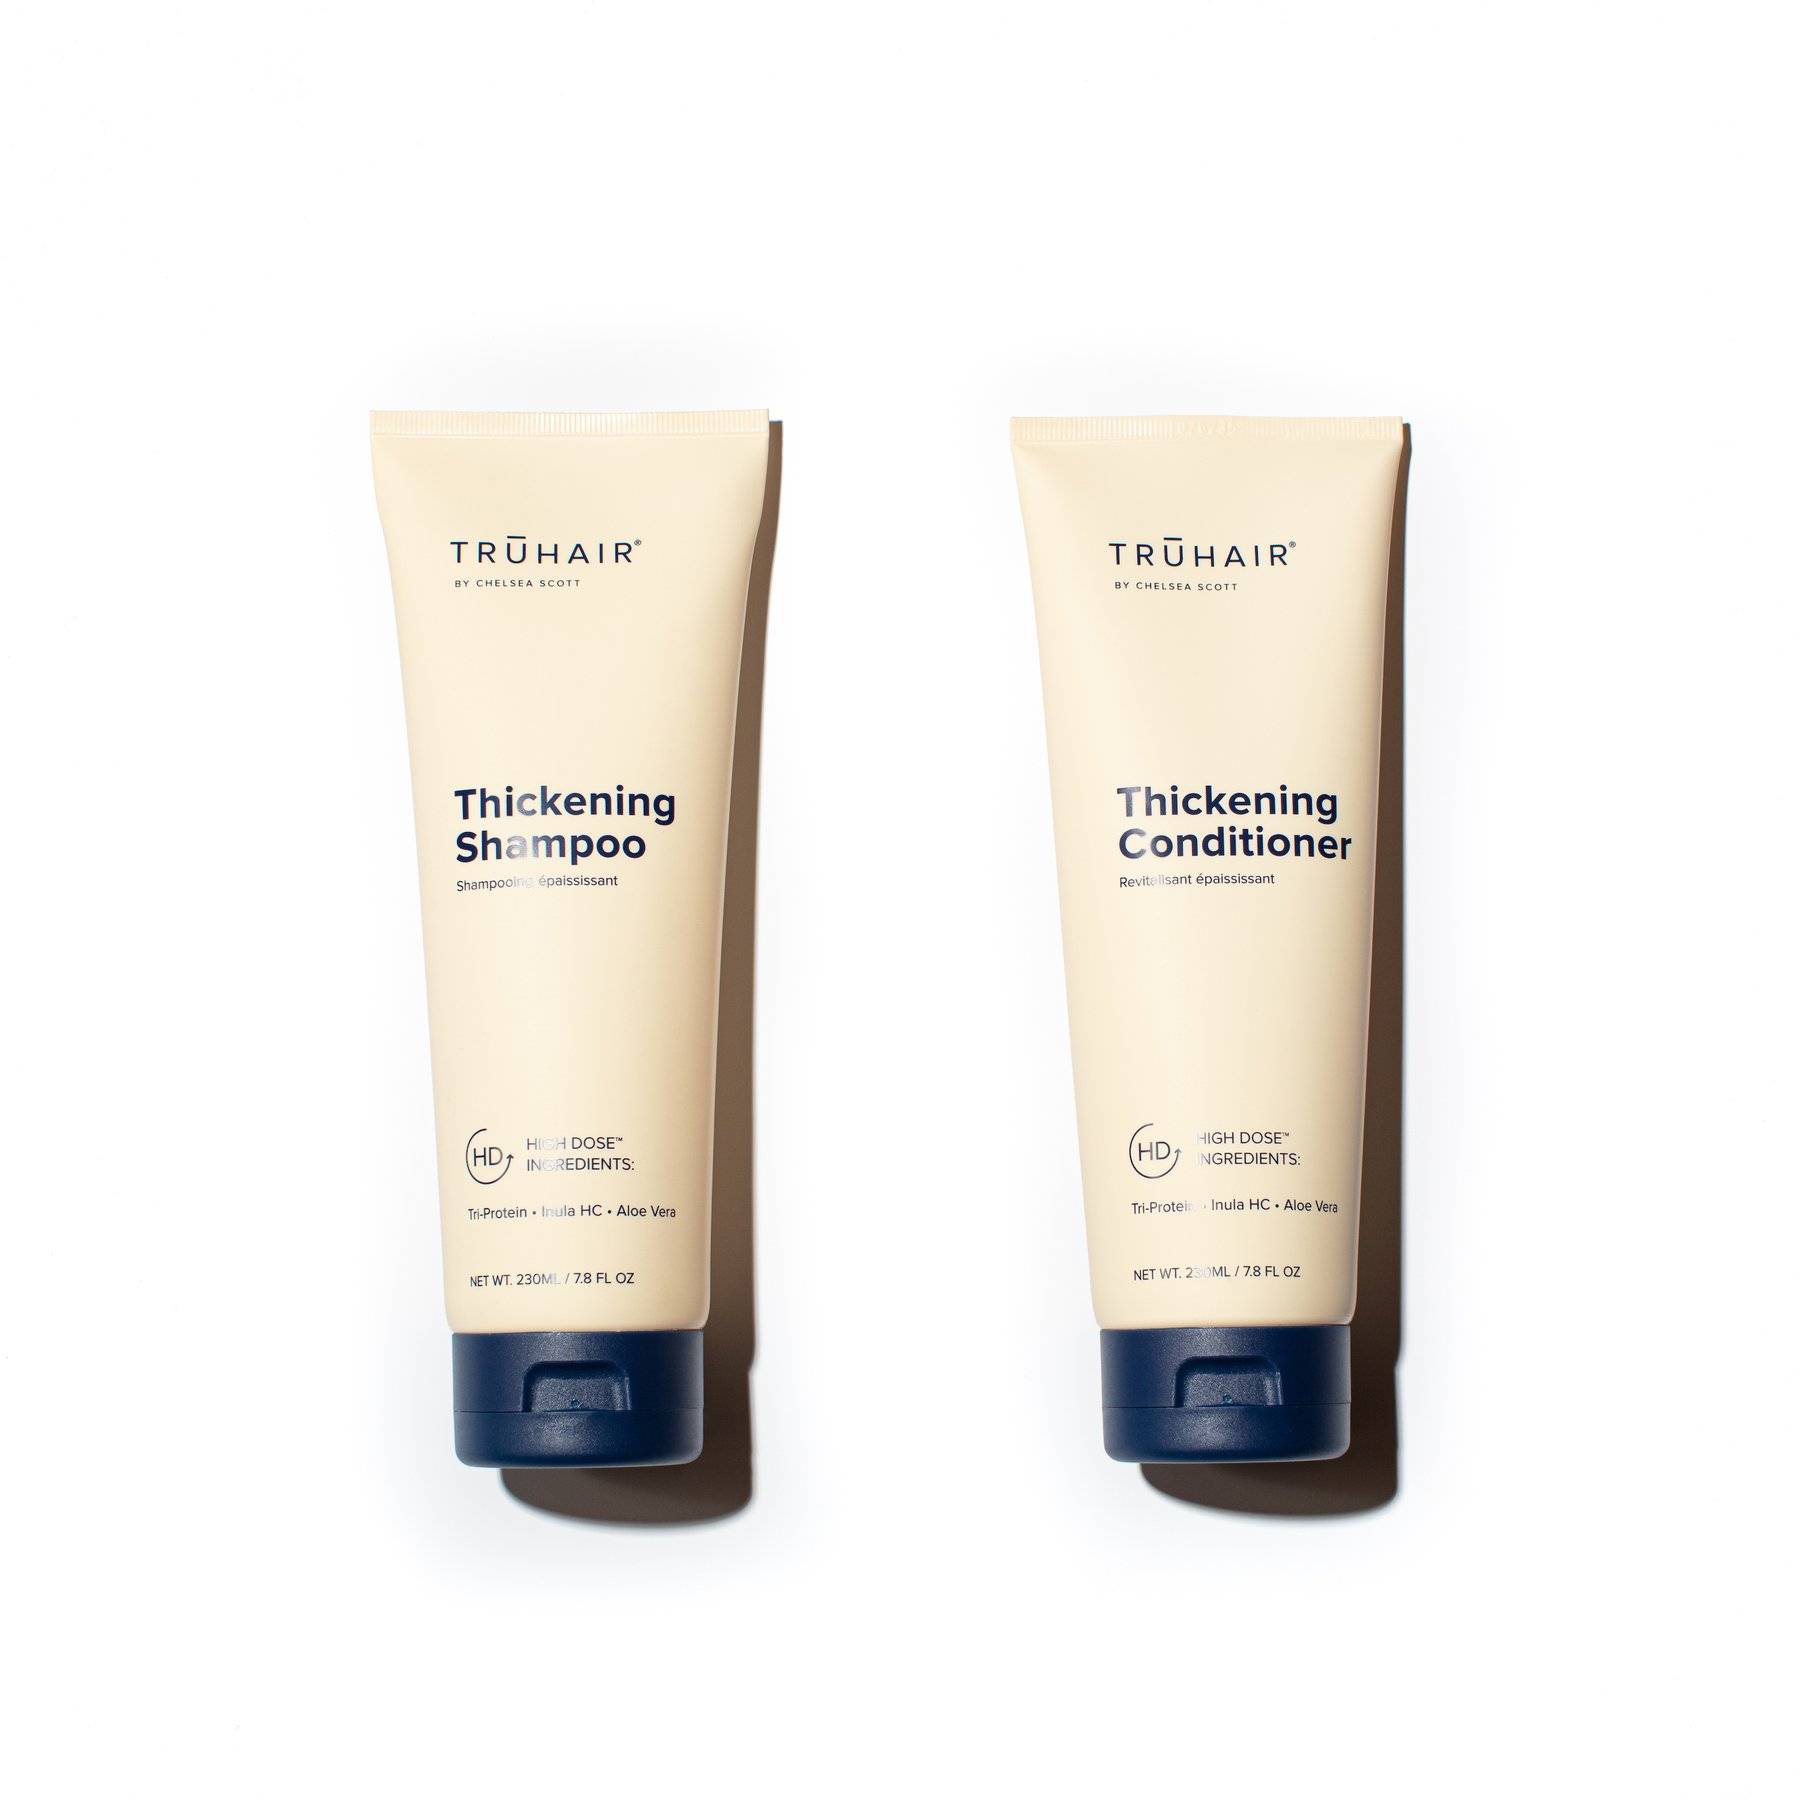 TRUHAIR Thickening Shampoo & Conditioner - Thick Hair in Five Washes –  TRUHAIR by Chelsea Scott